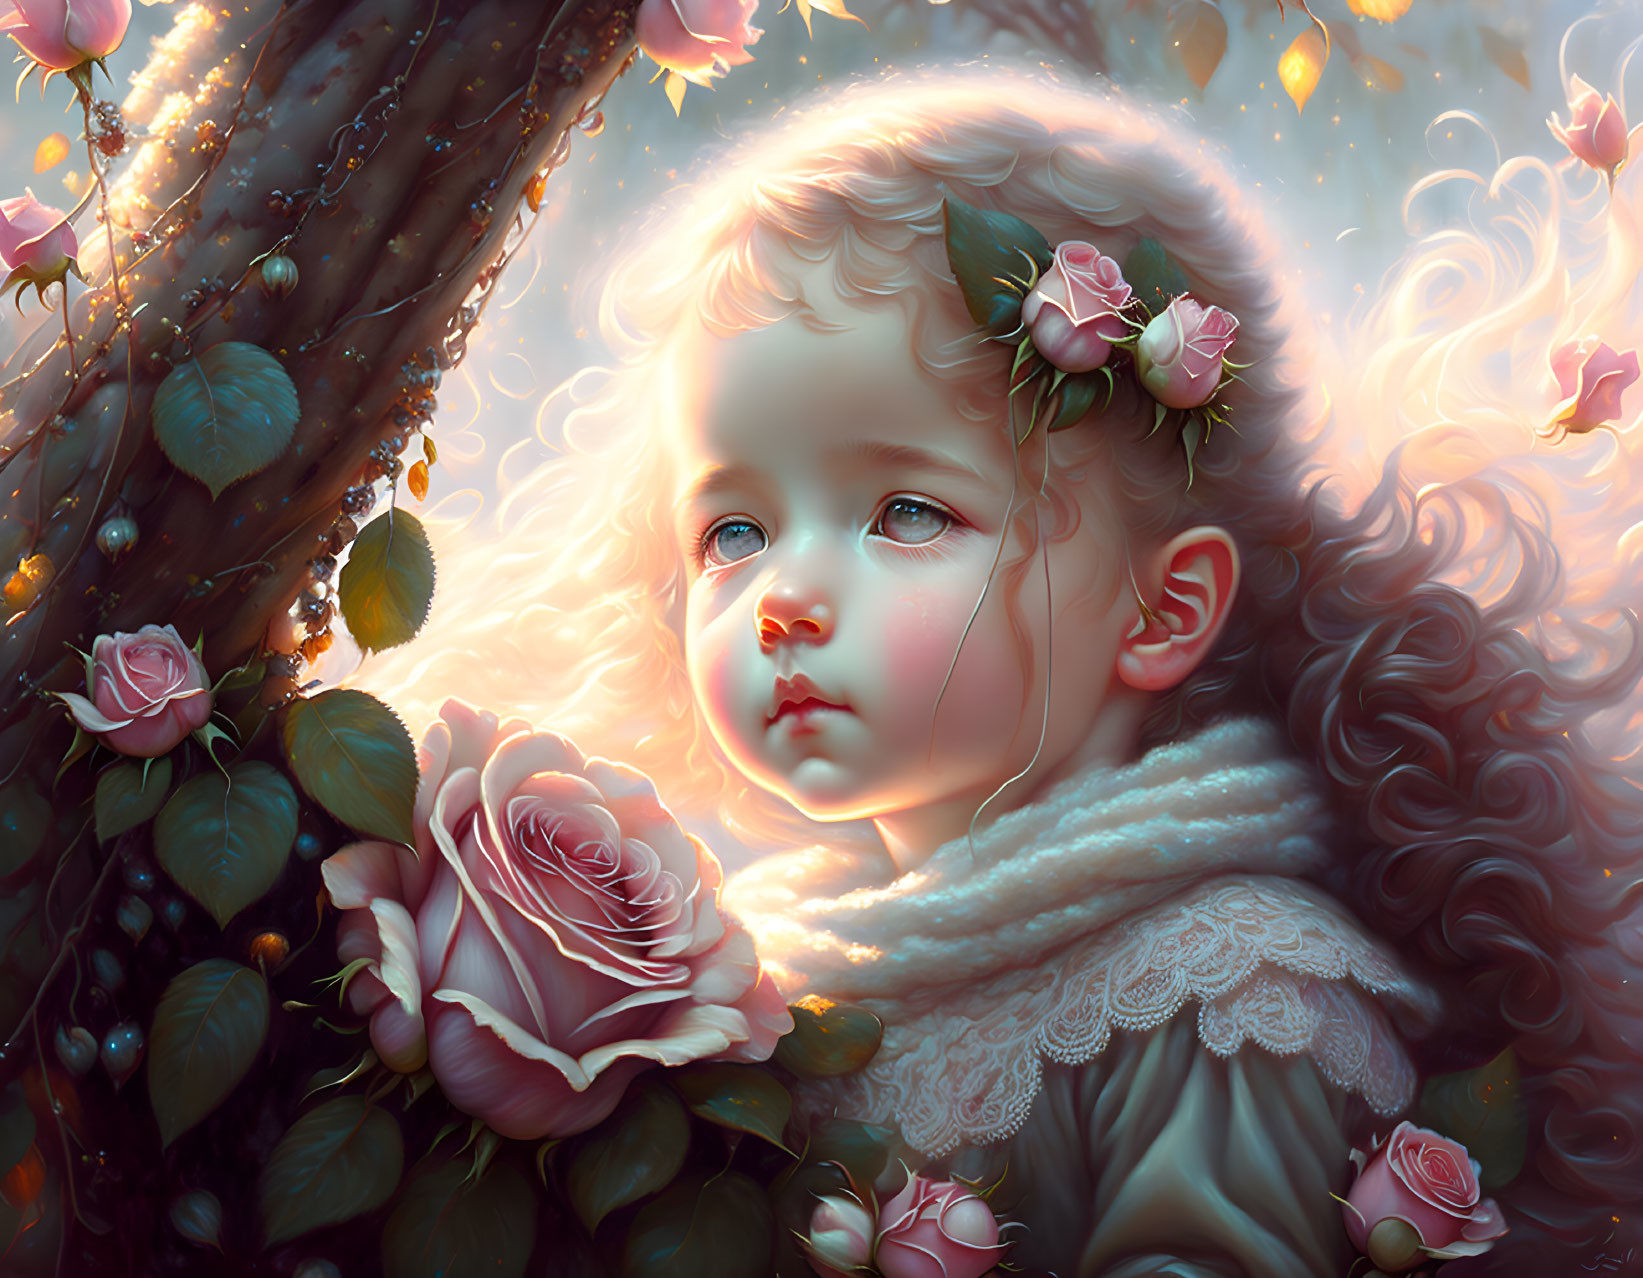 Portrait of Young Child with Curly Hair and Roses in Soft Lighting